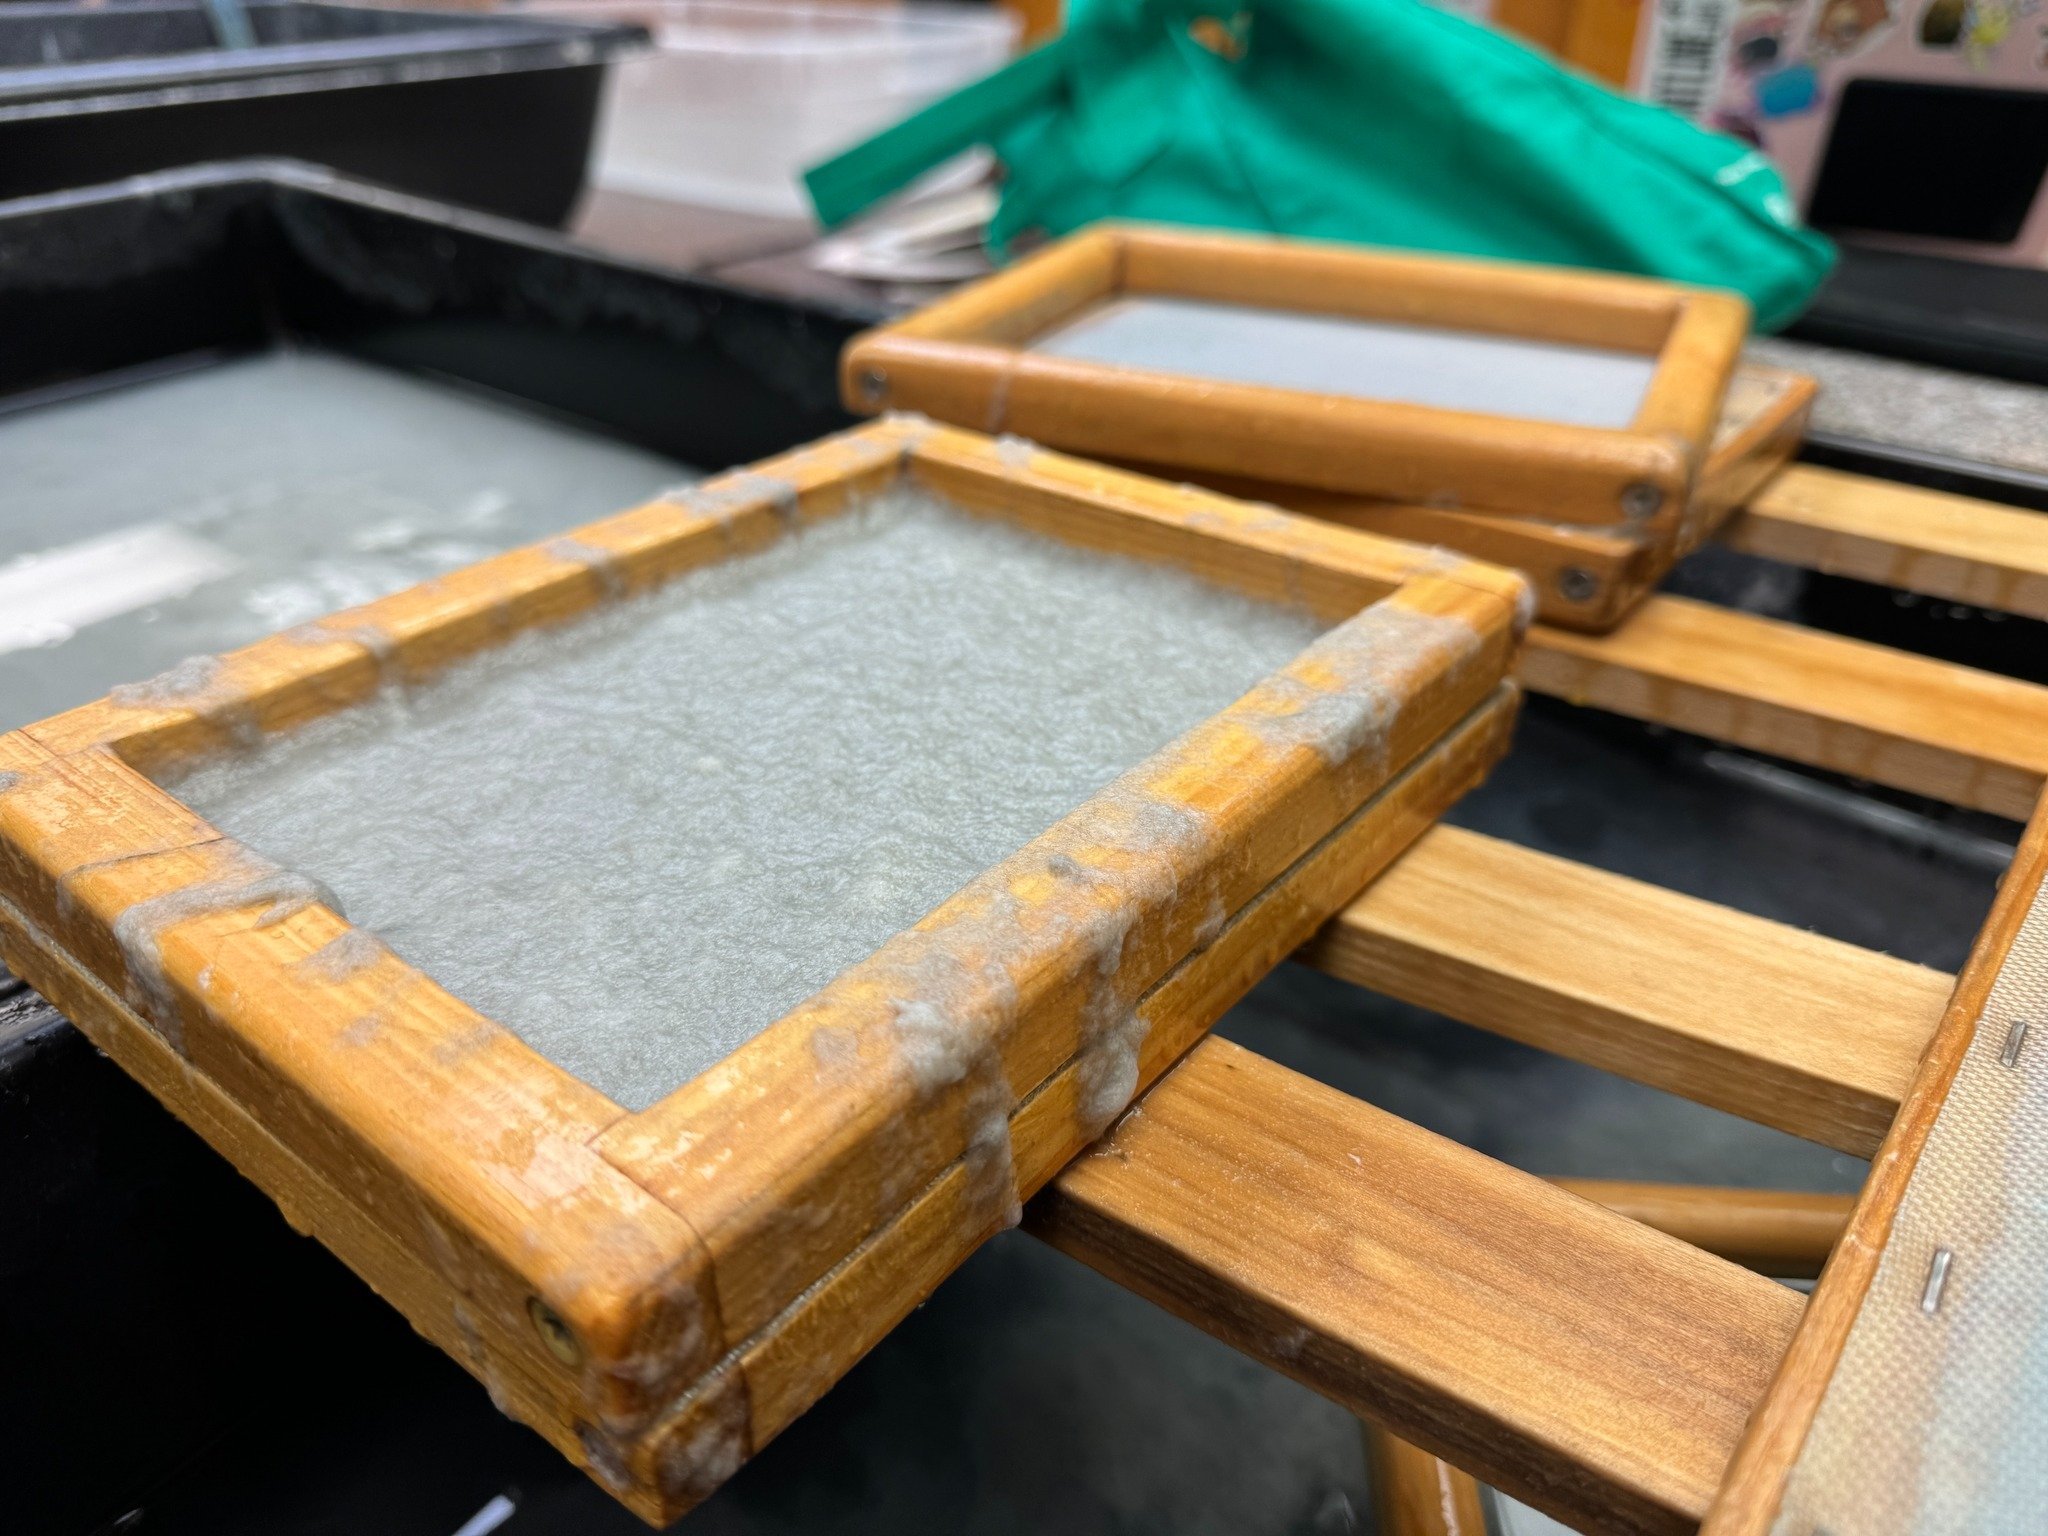 Yesterday we were busy making paper for a bulk order! It is always fun to pull some 5x7s.

#frontlinearts #frontlinepaper #papermaking #handmadepaper